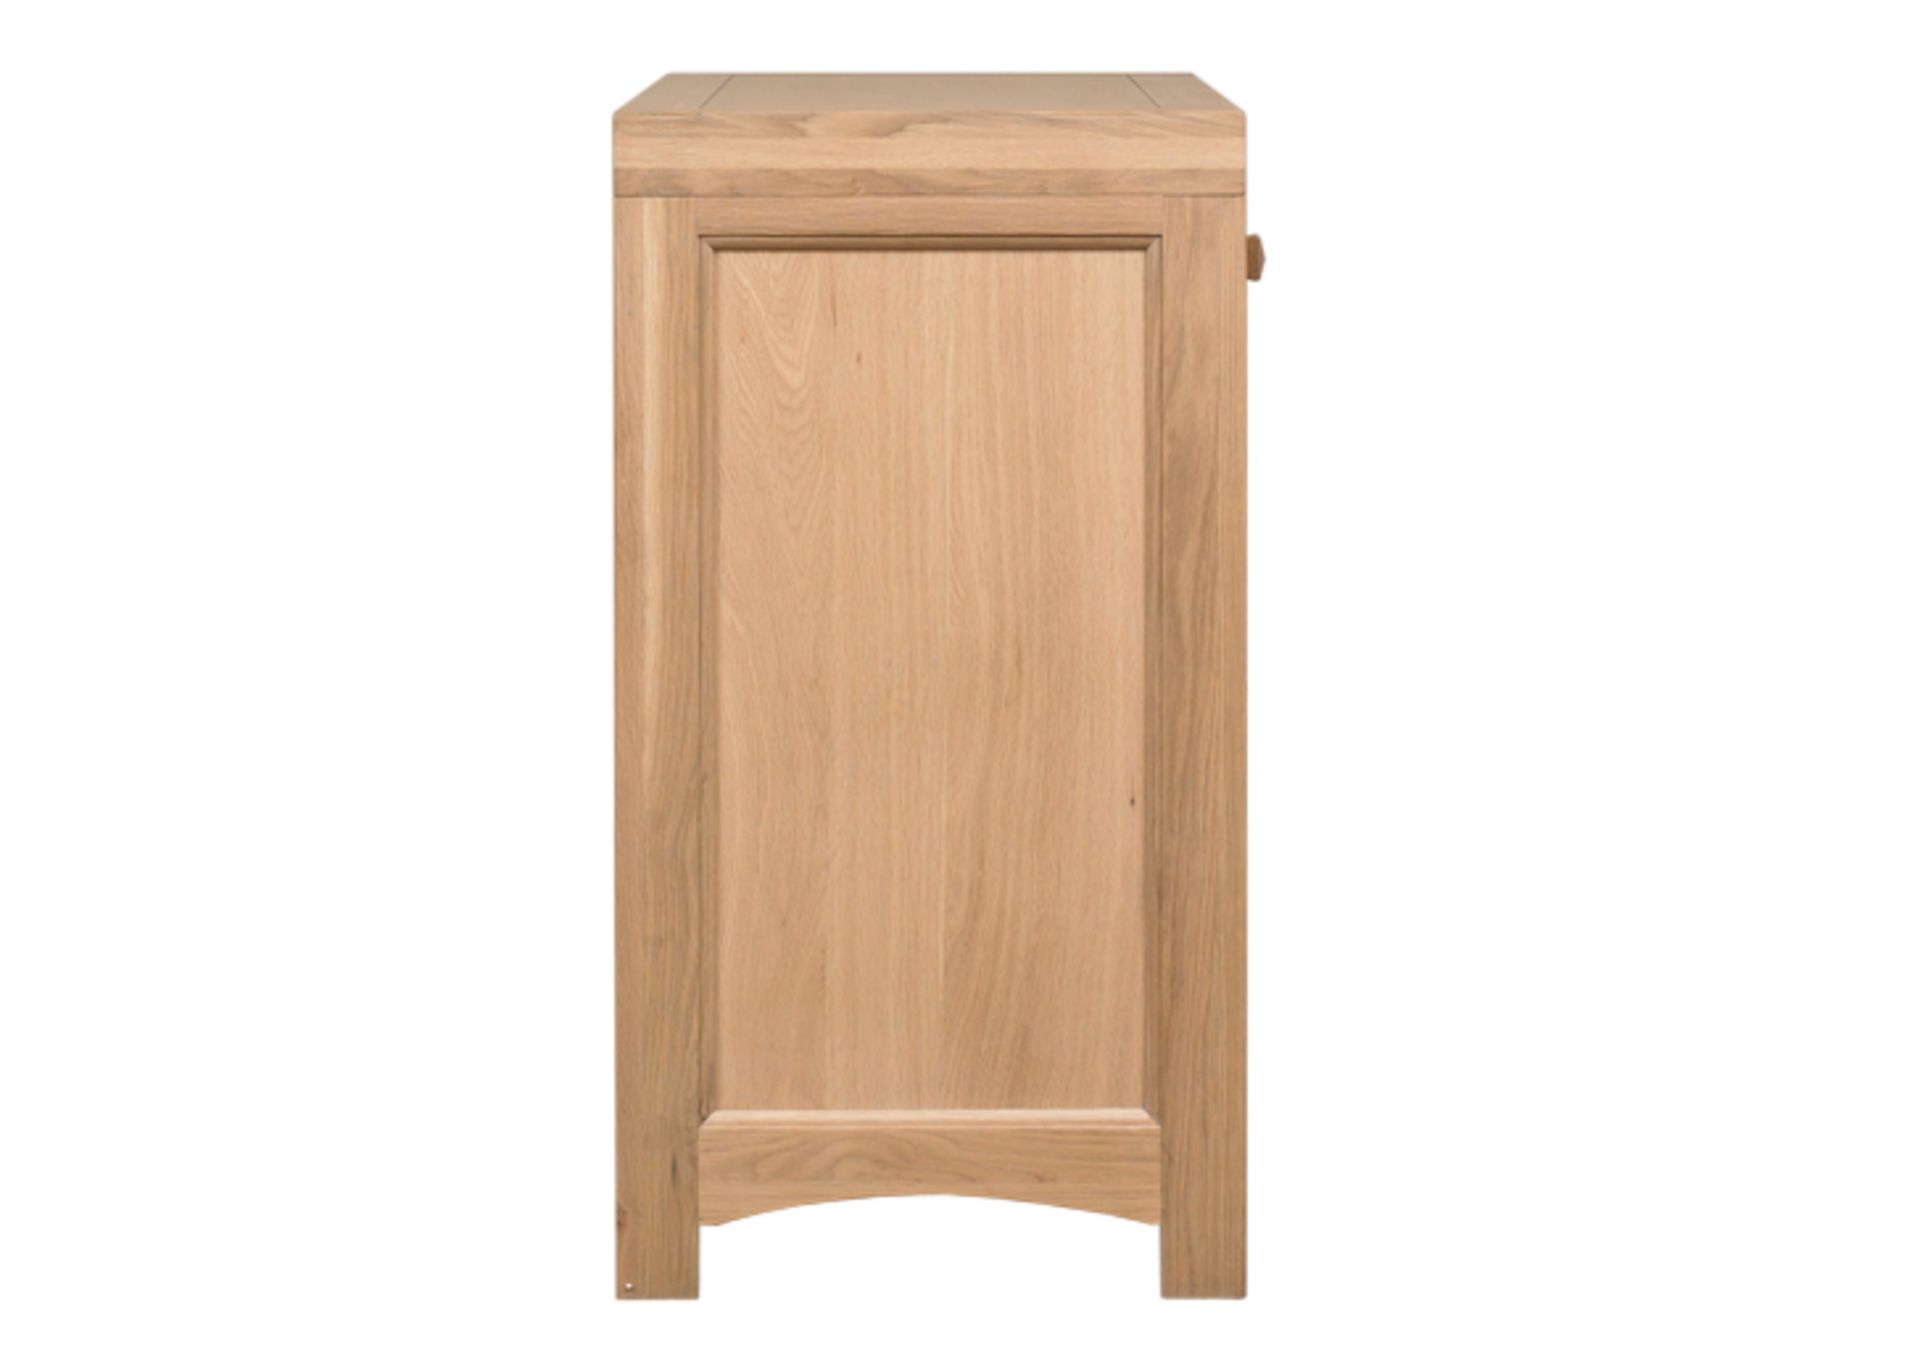 1 x Mark Webster Buckingham Large Sideboad - Two Door/Six Drawer - White Wash Oak With a Timeless - Image 5 of 5